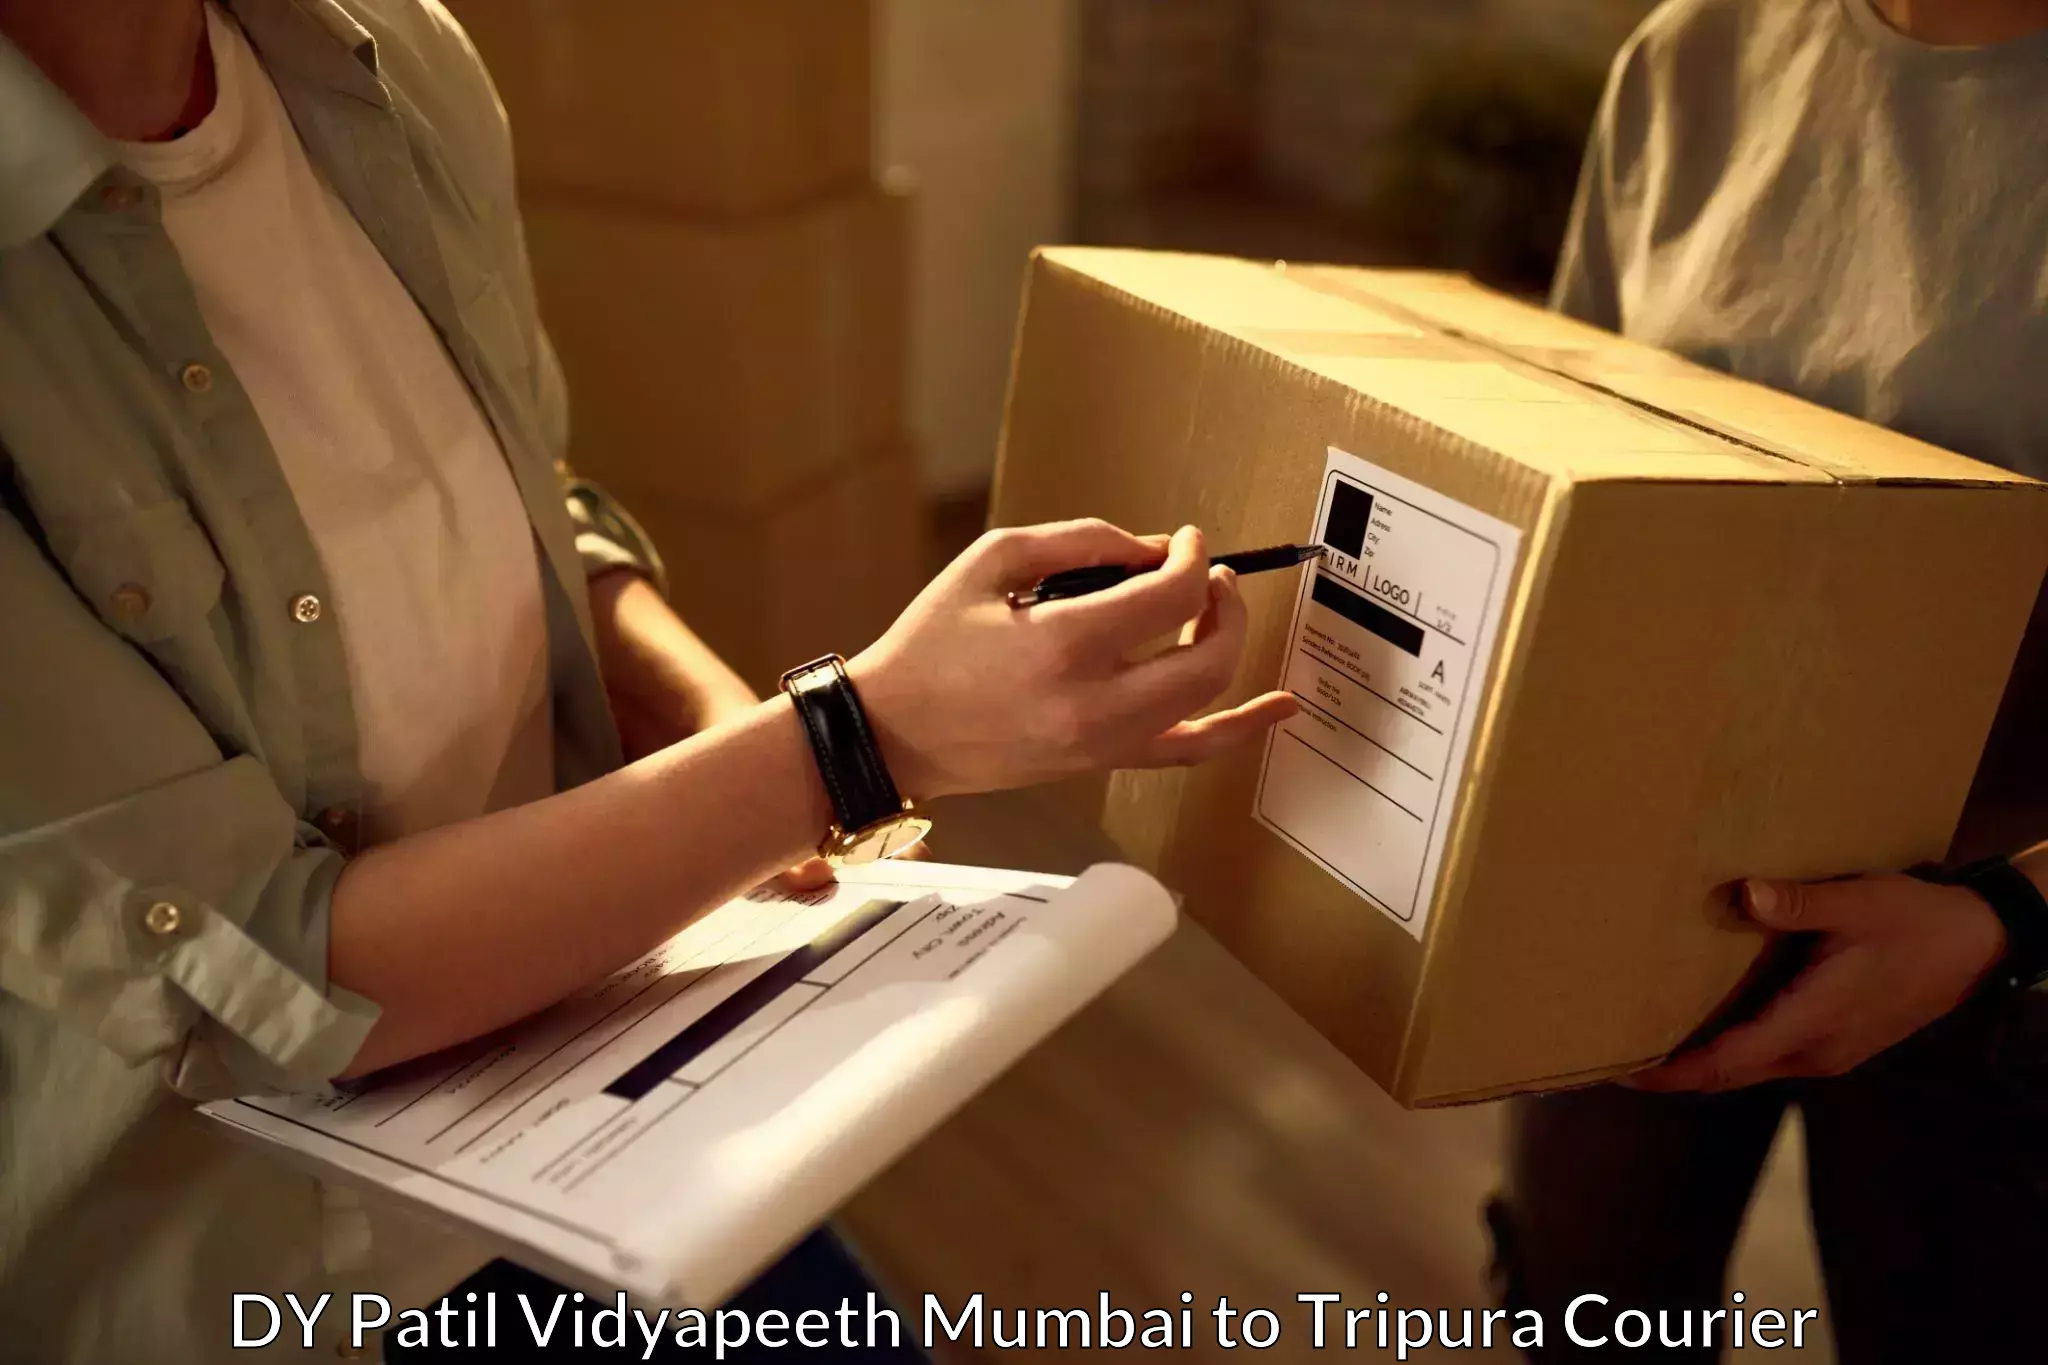 Multi-national courier services DY Patil Vidyapeeth Mumbai to Aambasa